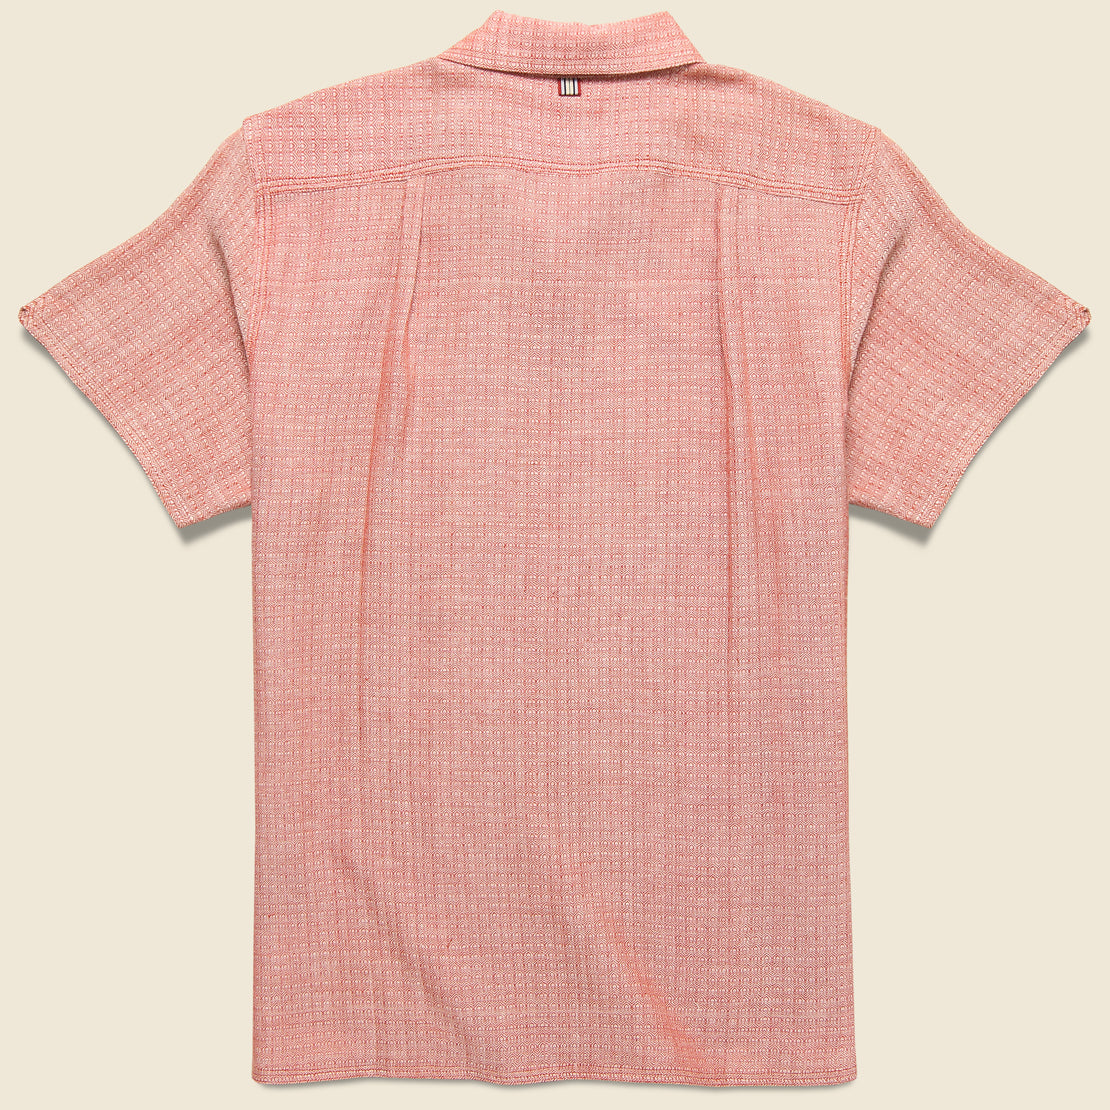 Chintan Handwoven Shirt - Pink - Kardo - STAG Provisions - Tops - S/S Woven - Solid